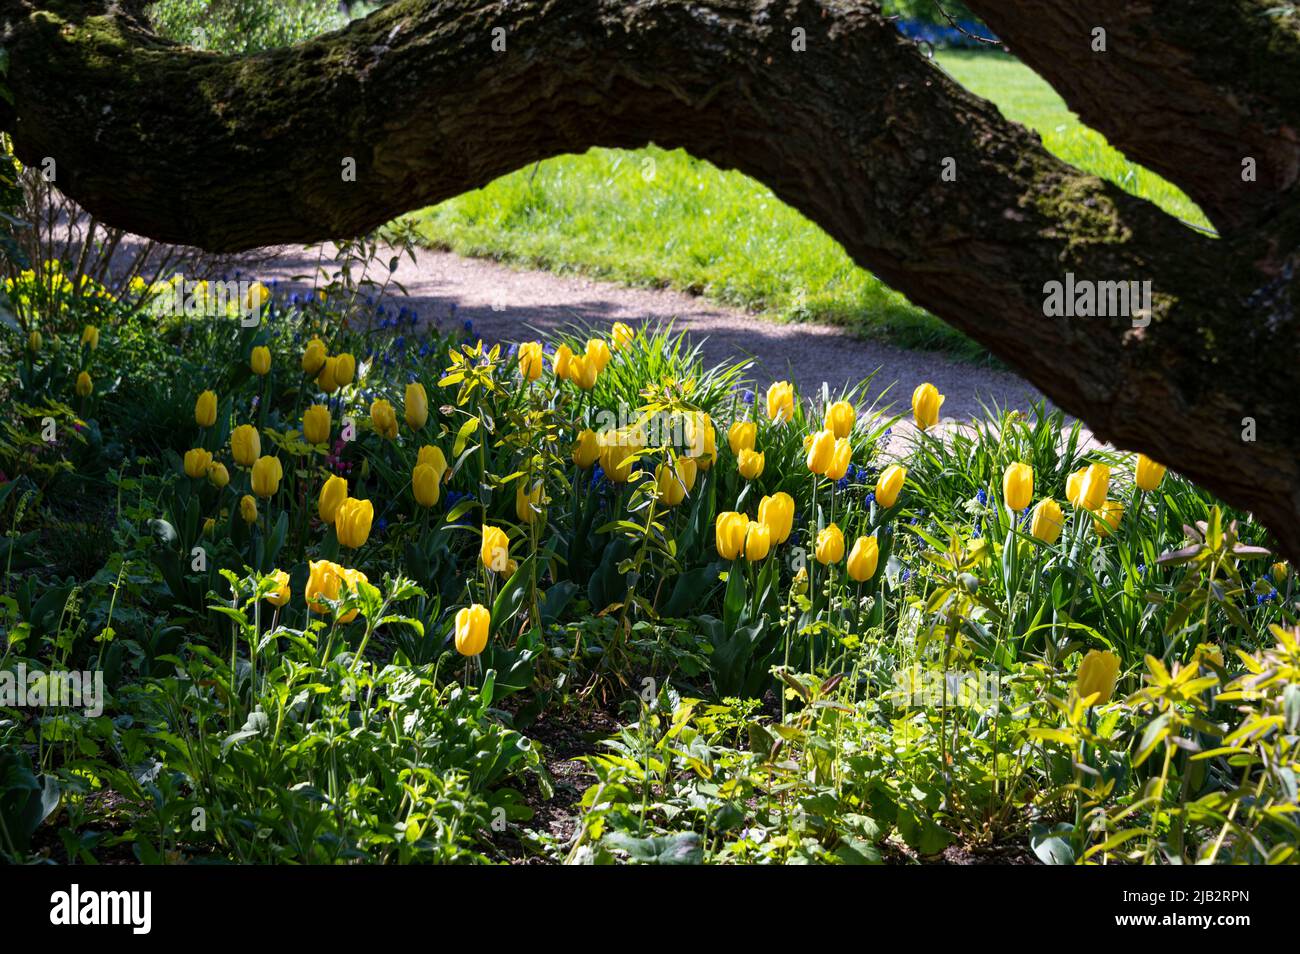 Yellow tulips growing in the sunshine, under an overhanging tree branch. Stock Photo